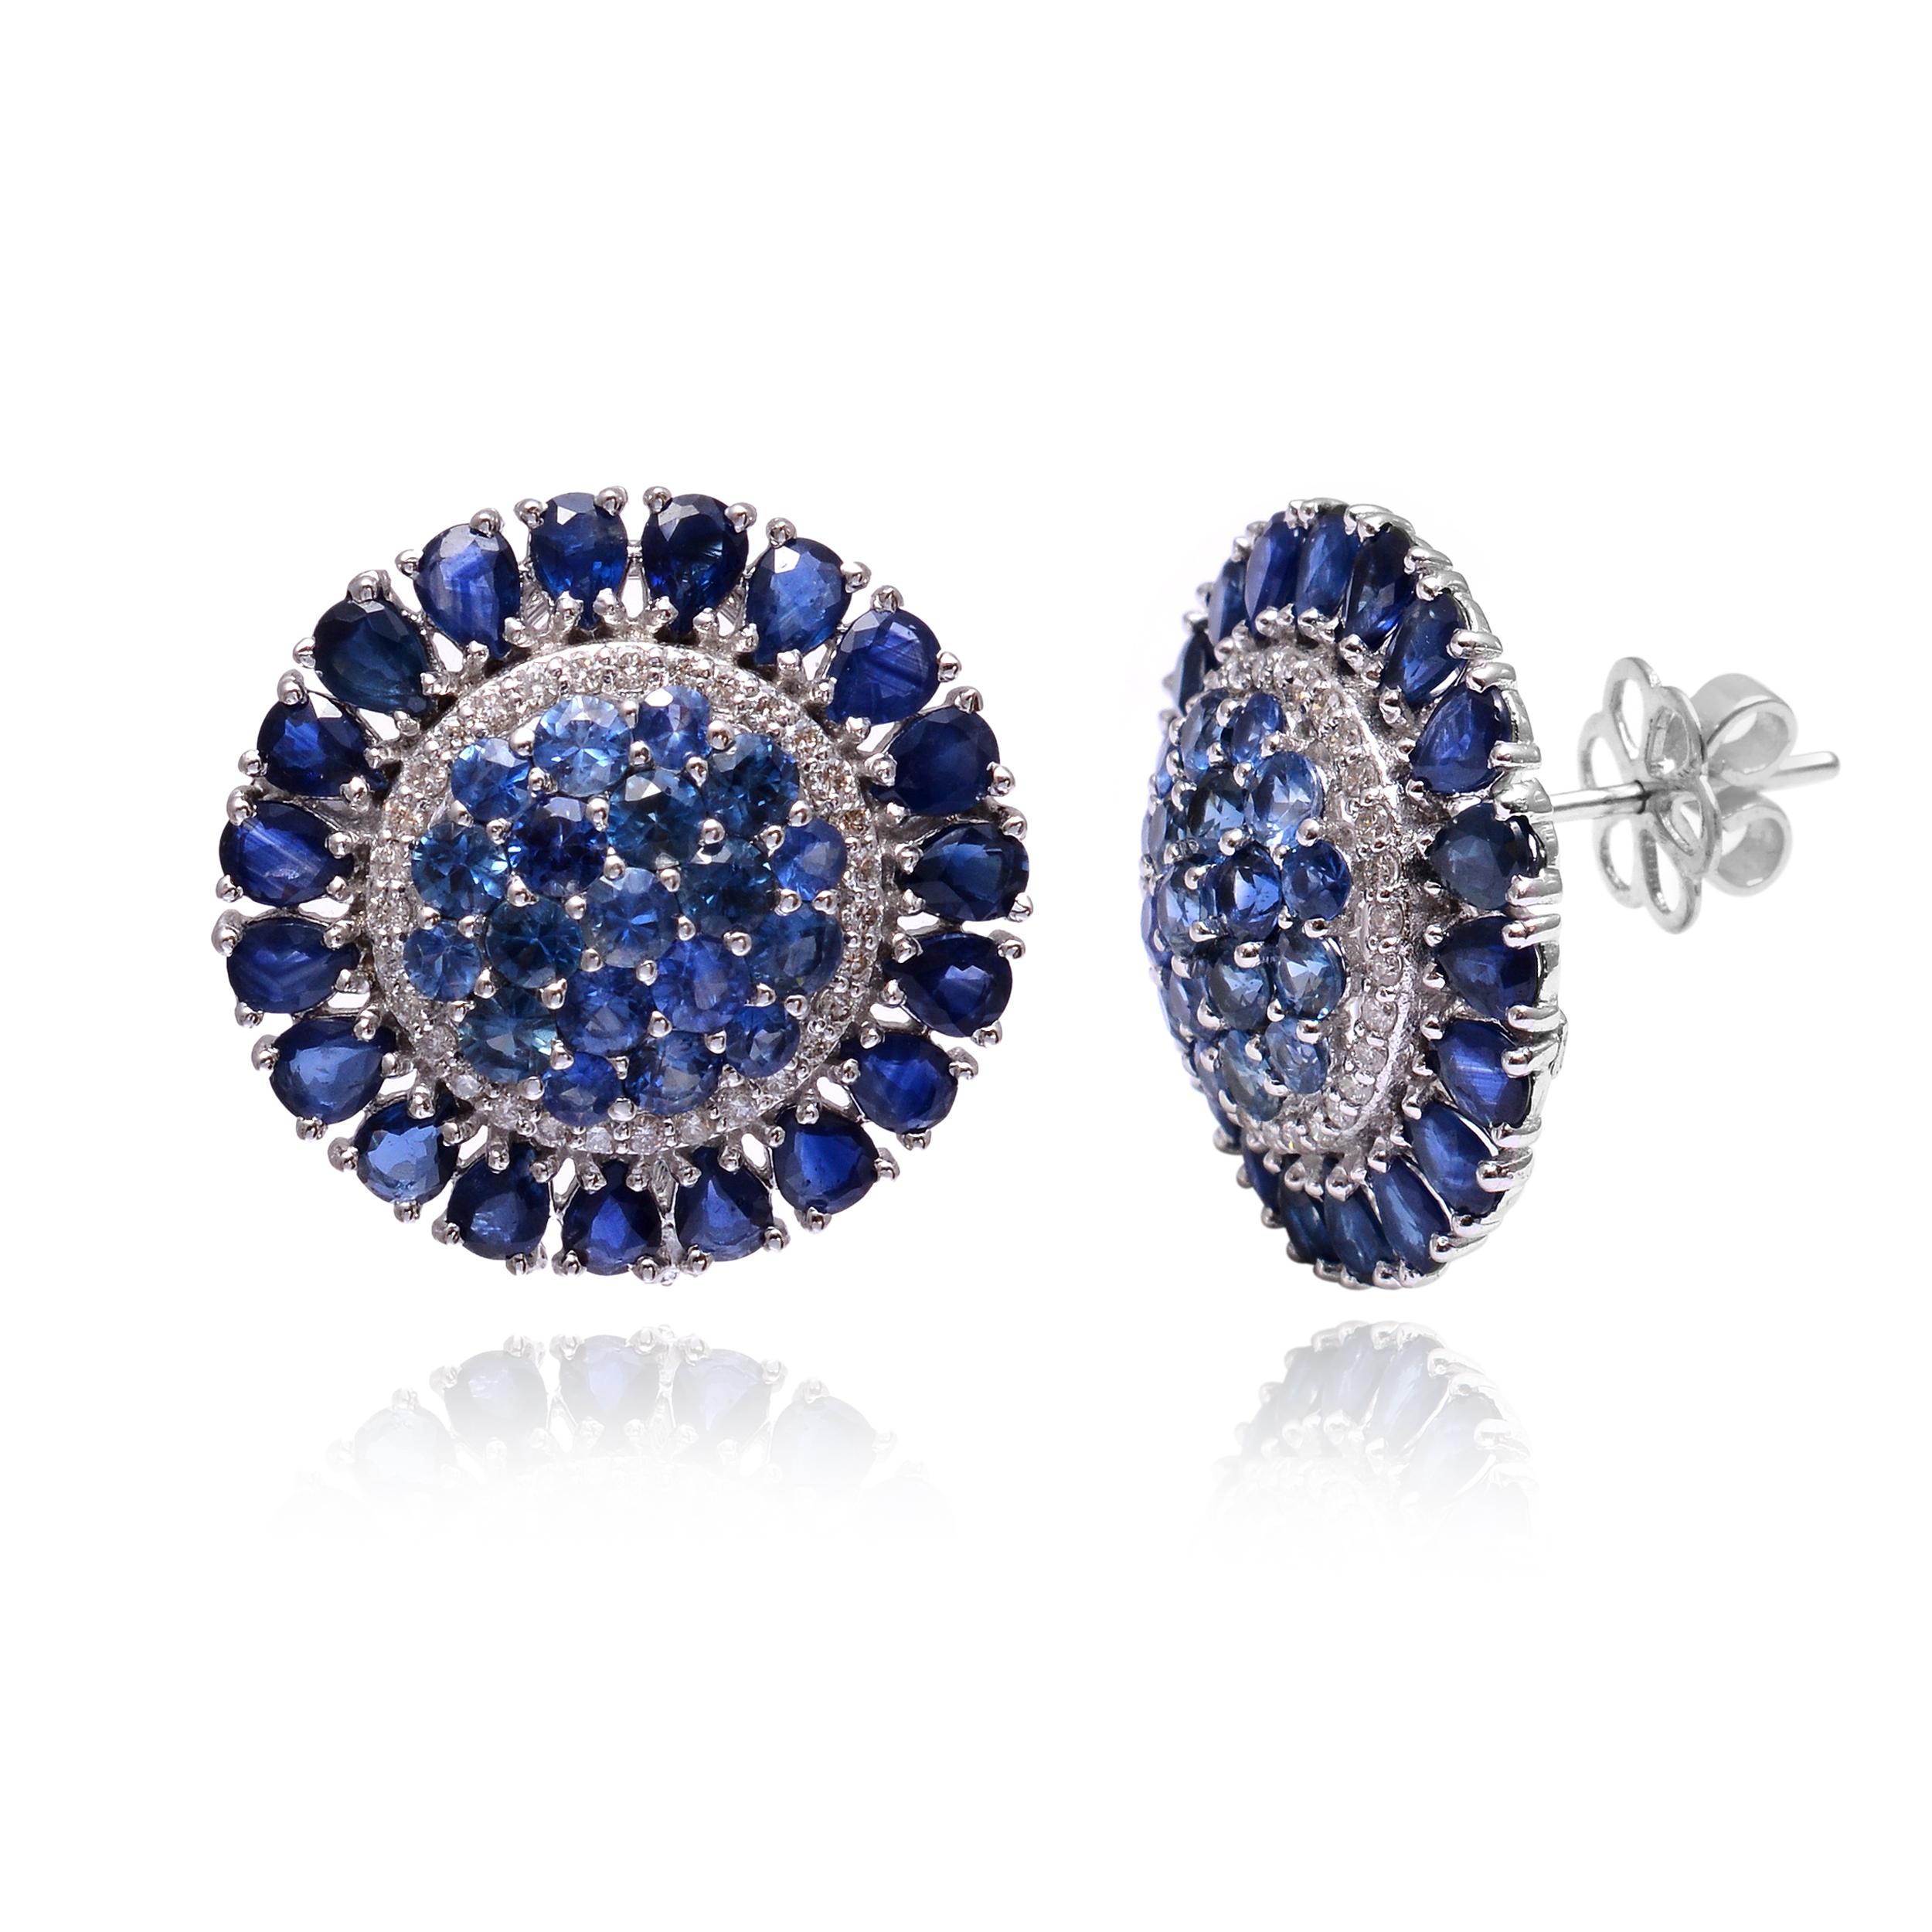 These earrings are made with sapphire gemstone and 18k yellow gold. It is so Casual and elegant. it is perfect for any occasion.

Specifications:

Dimensions: 18 MM
Gross Weight: 12.830 gms
Gold Weight: 10.820 gms
Gold Purity: 14k Yellow